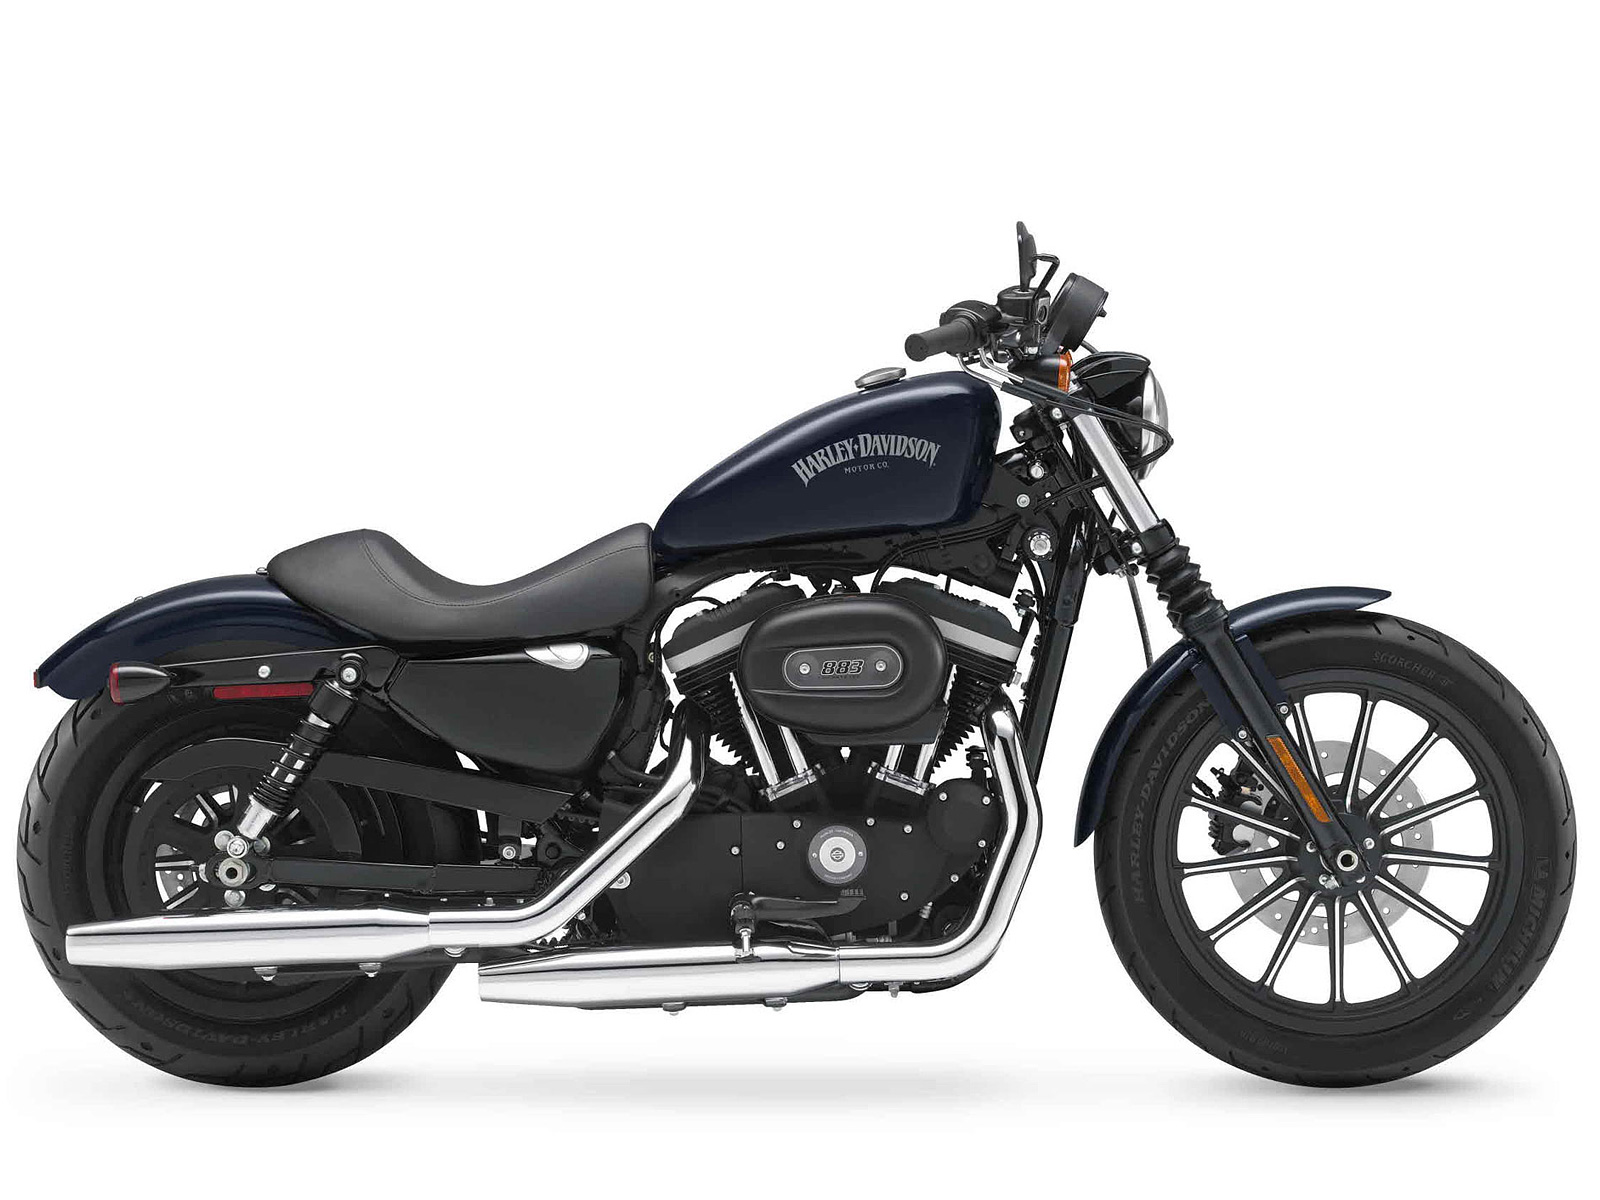 2012 Harley Davidson XL883N Iron 883 pictures review